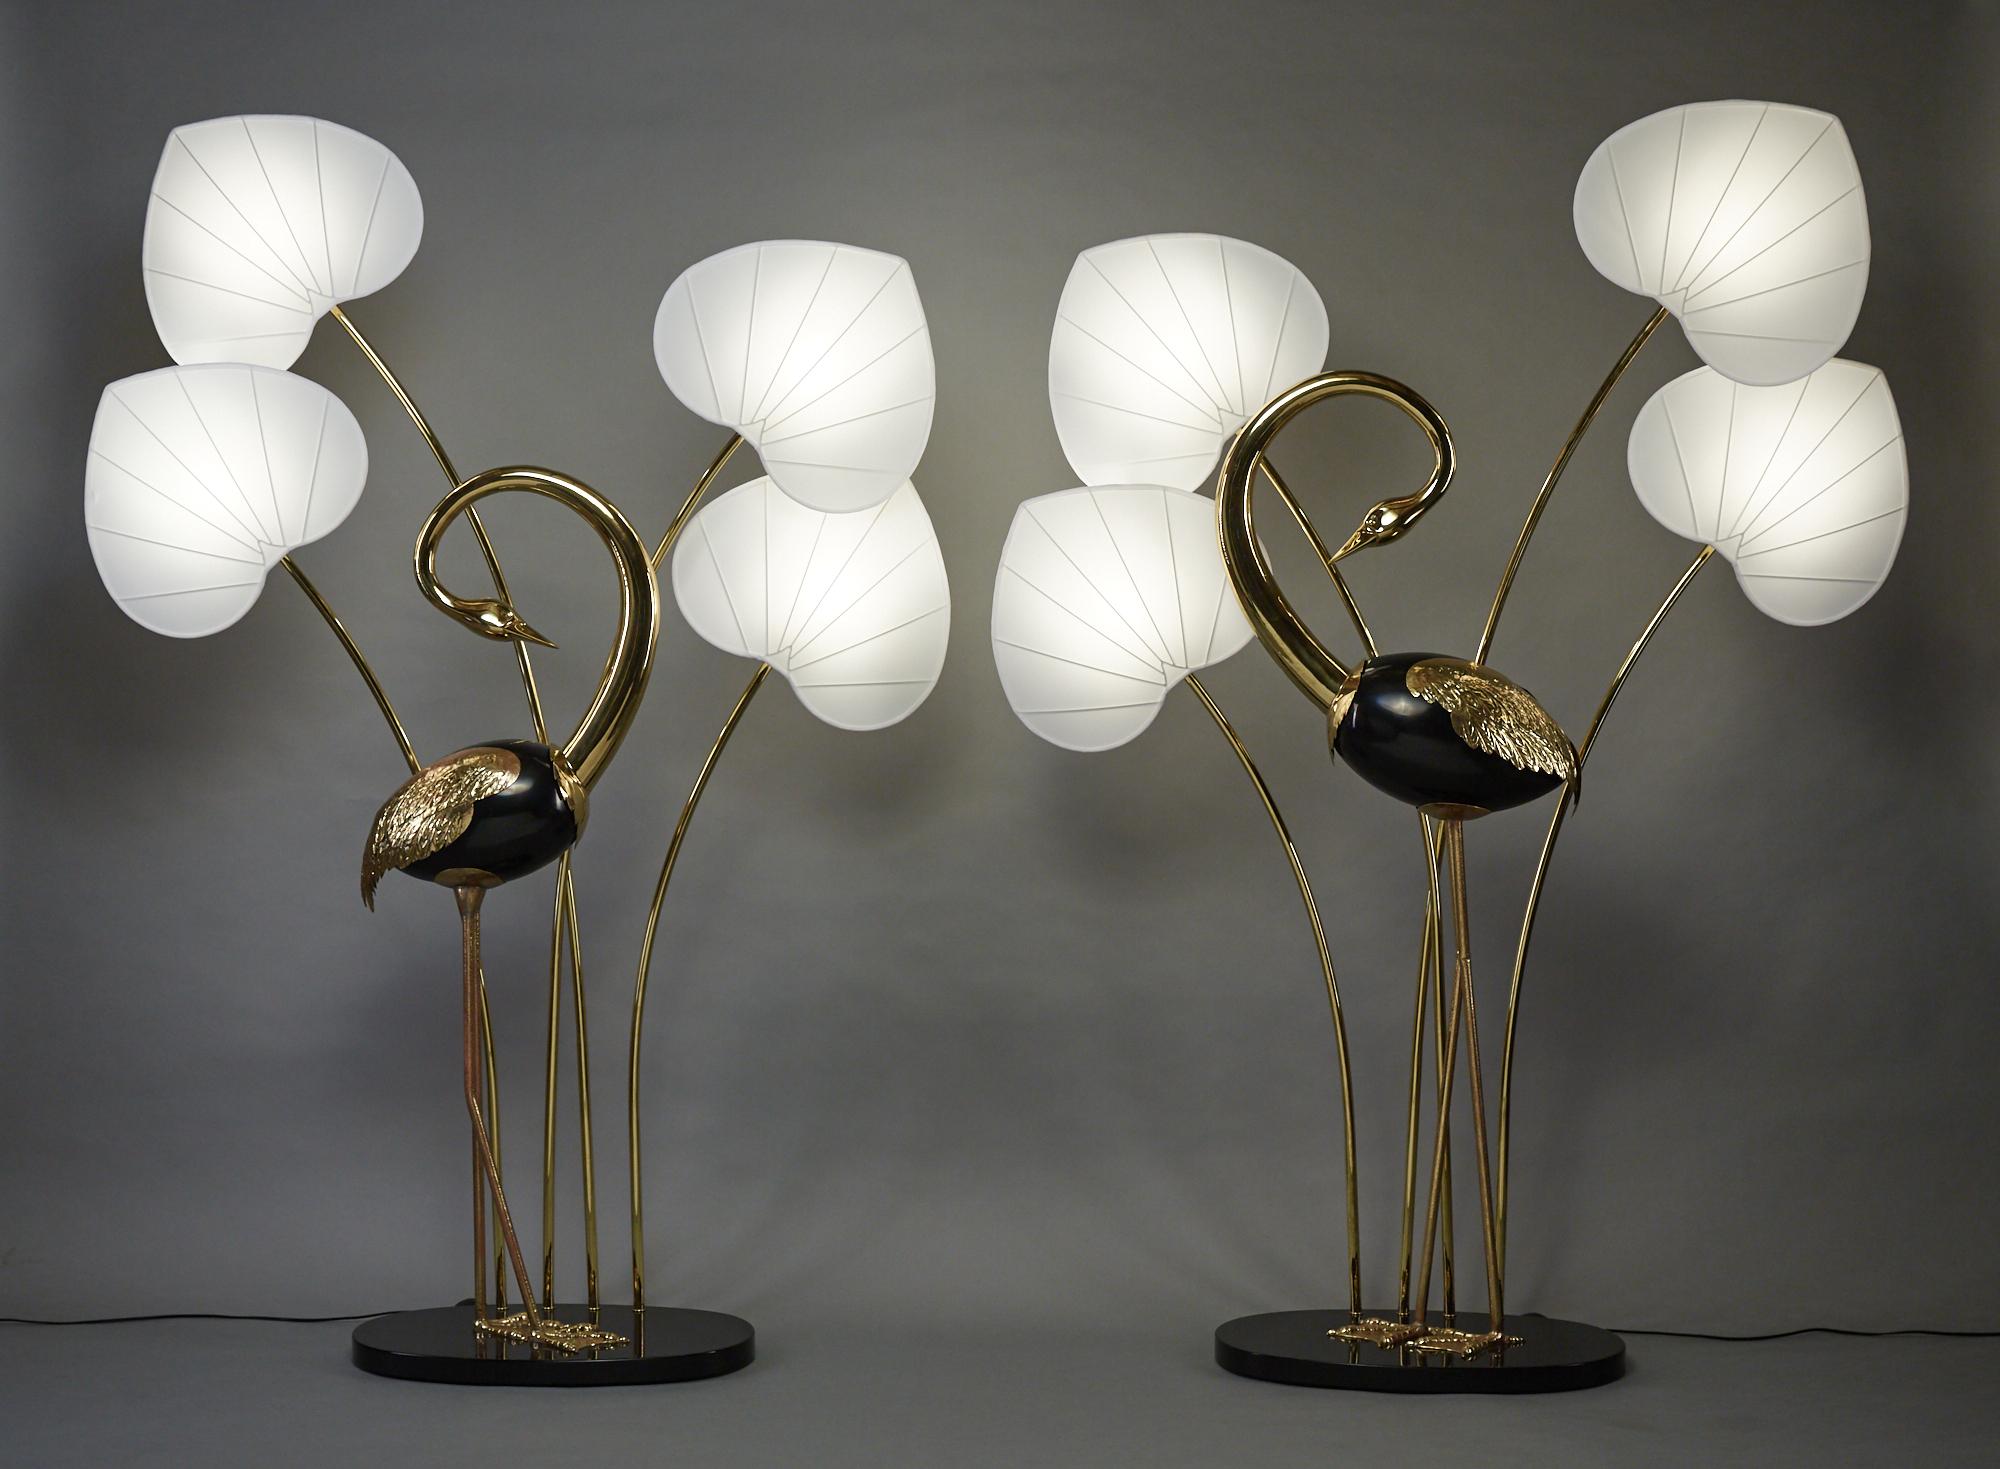 Monumental pair of brass standing egret / flamingo floor lamps by Antonio Pavia with black lacquered wood body.
Lamps measure 80 inches high including the shades. One egret by itself measures 55 inches tall and the other 61 inches. Lamps have on/off